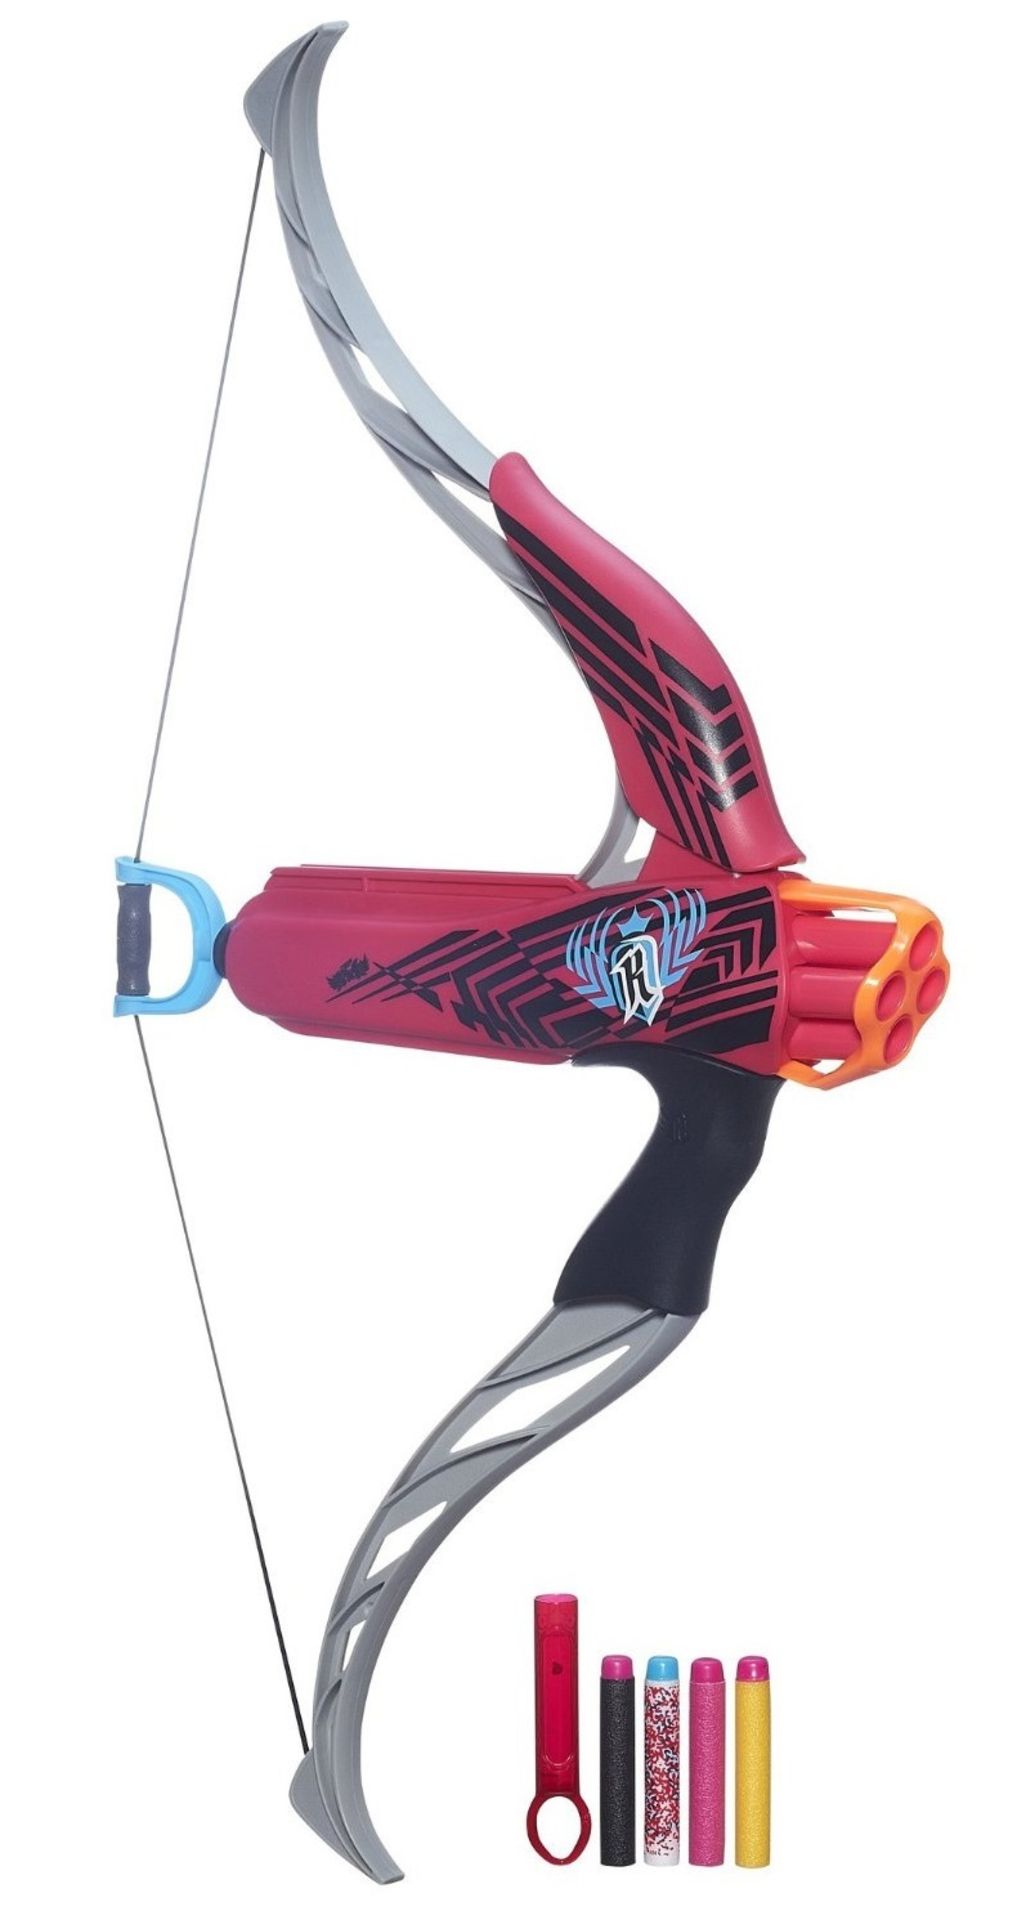 V Brand New Hasbro Nerf Rebelle Secrets And Spies Strongheart Bow With 4 Darts And Decoder Age 8+ - Image 2 of 2